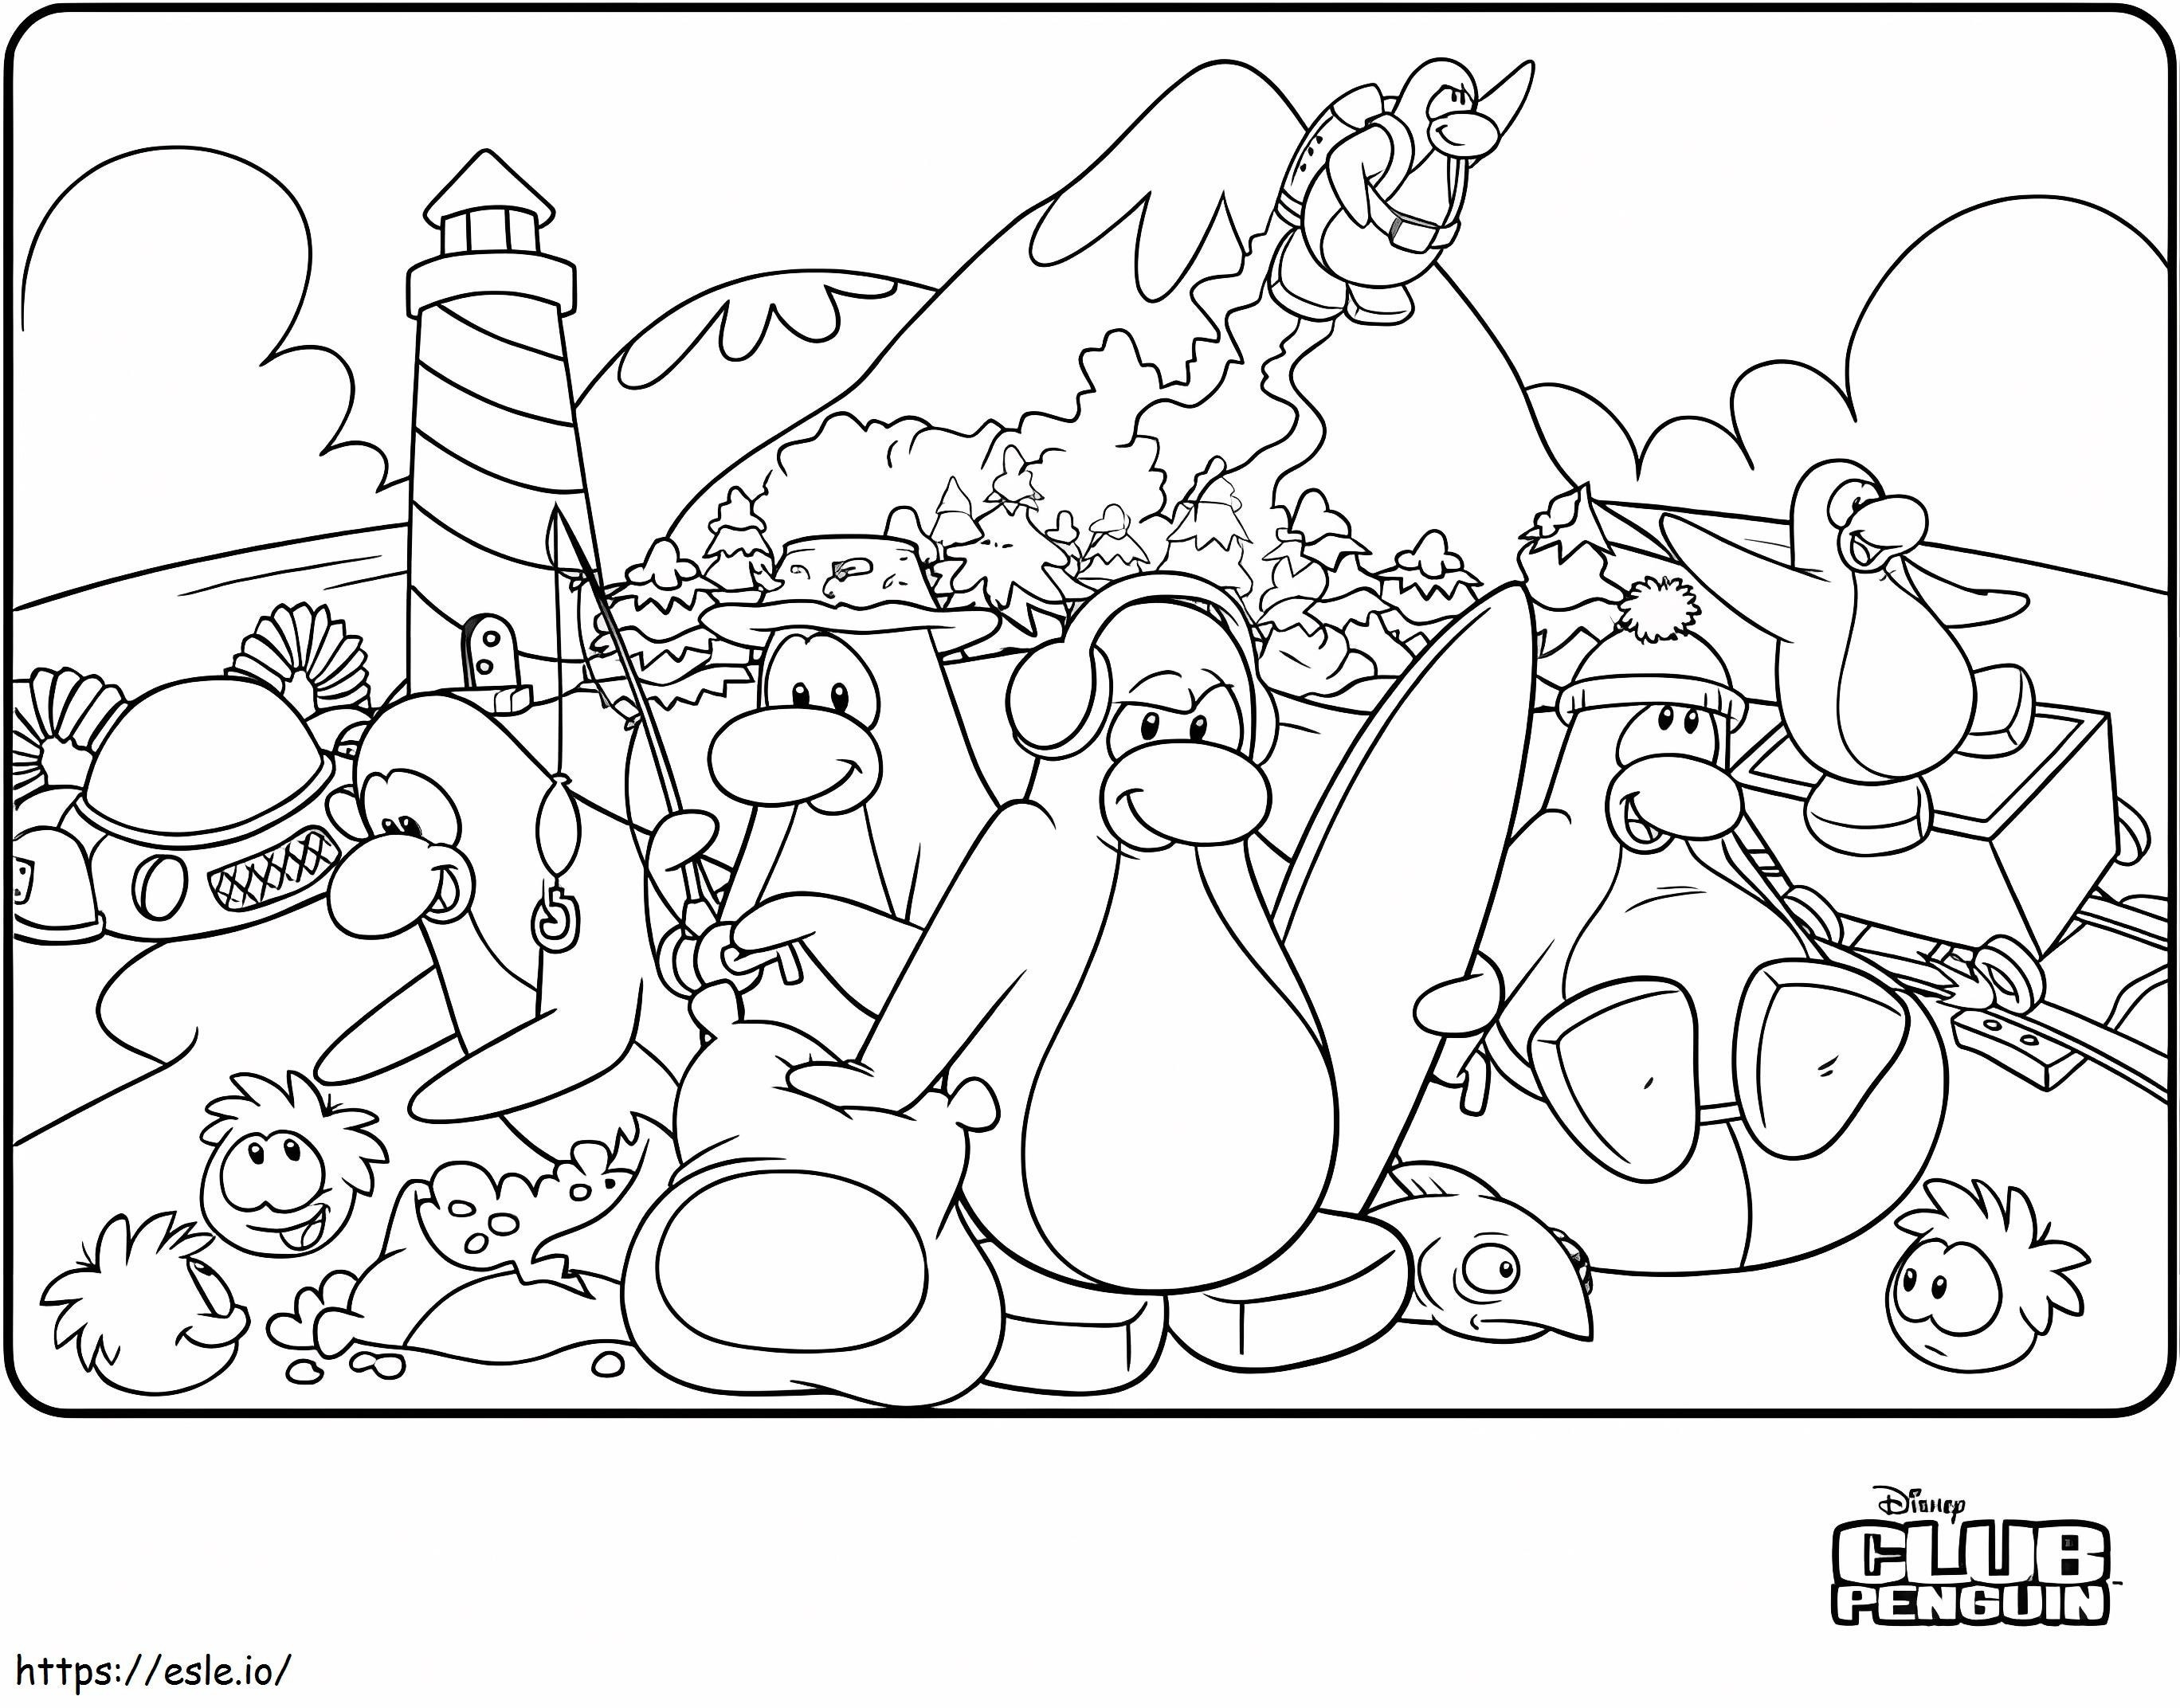 Amazing Club Penguin coloring page